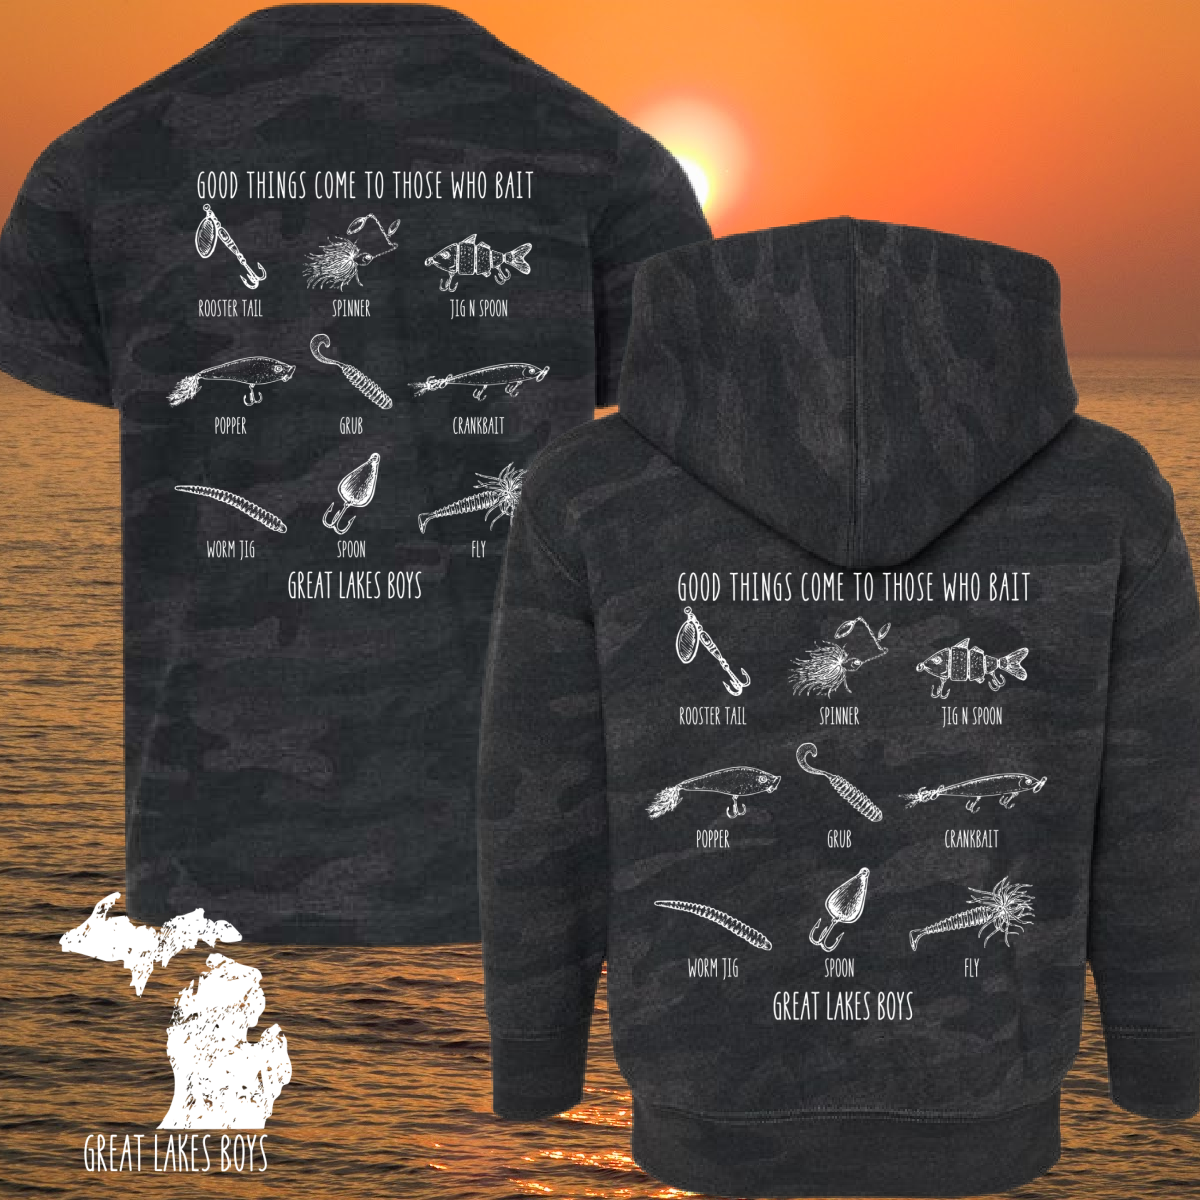 Great Lakes Boys - BLACK CAMO Good Things Come To Those Who Bait